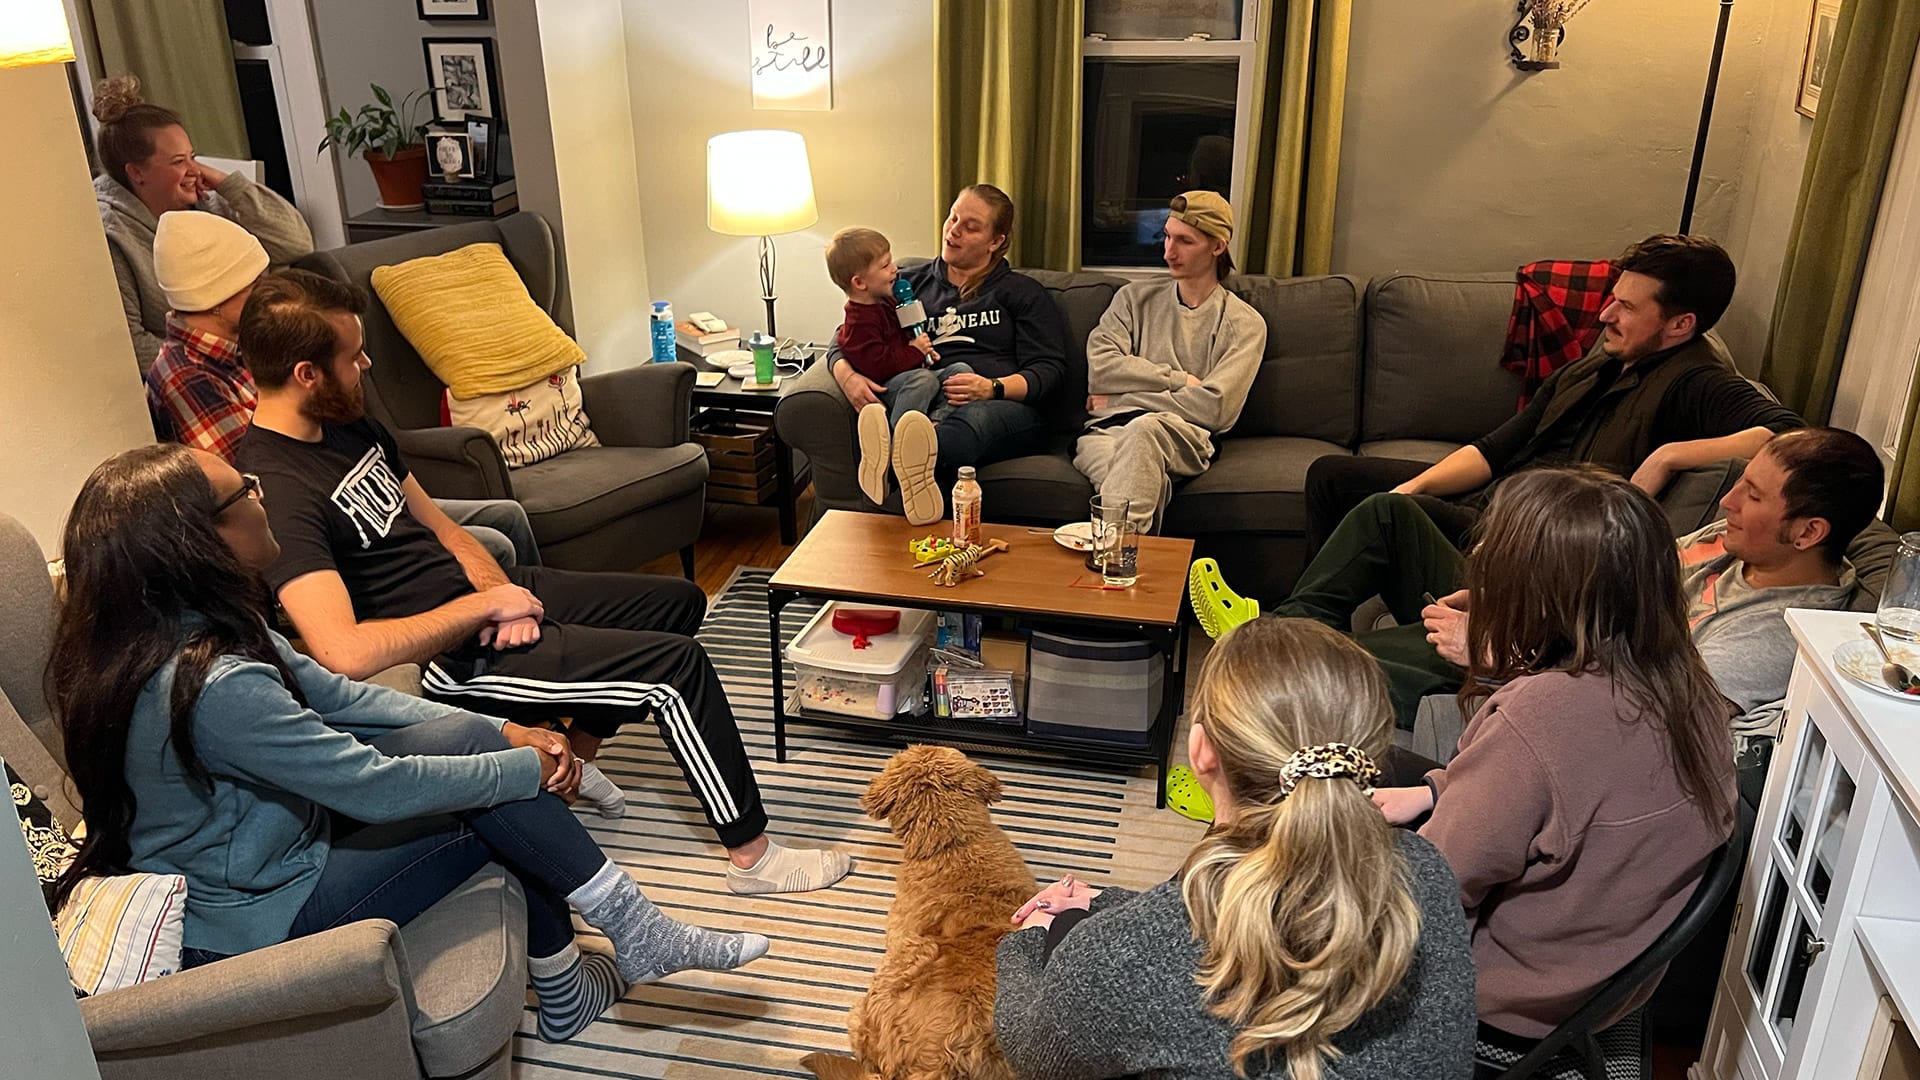 A community group gathered in living room in Minneapolis